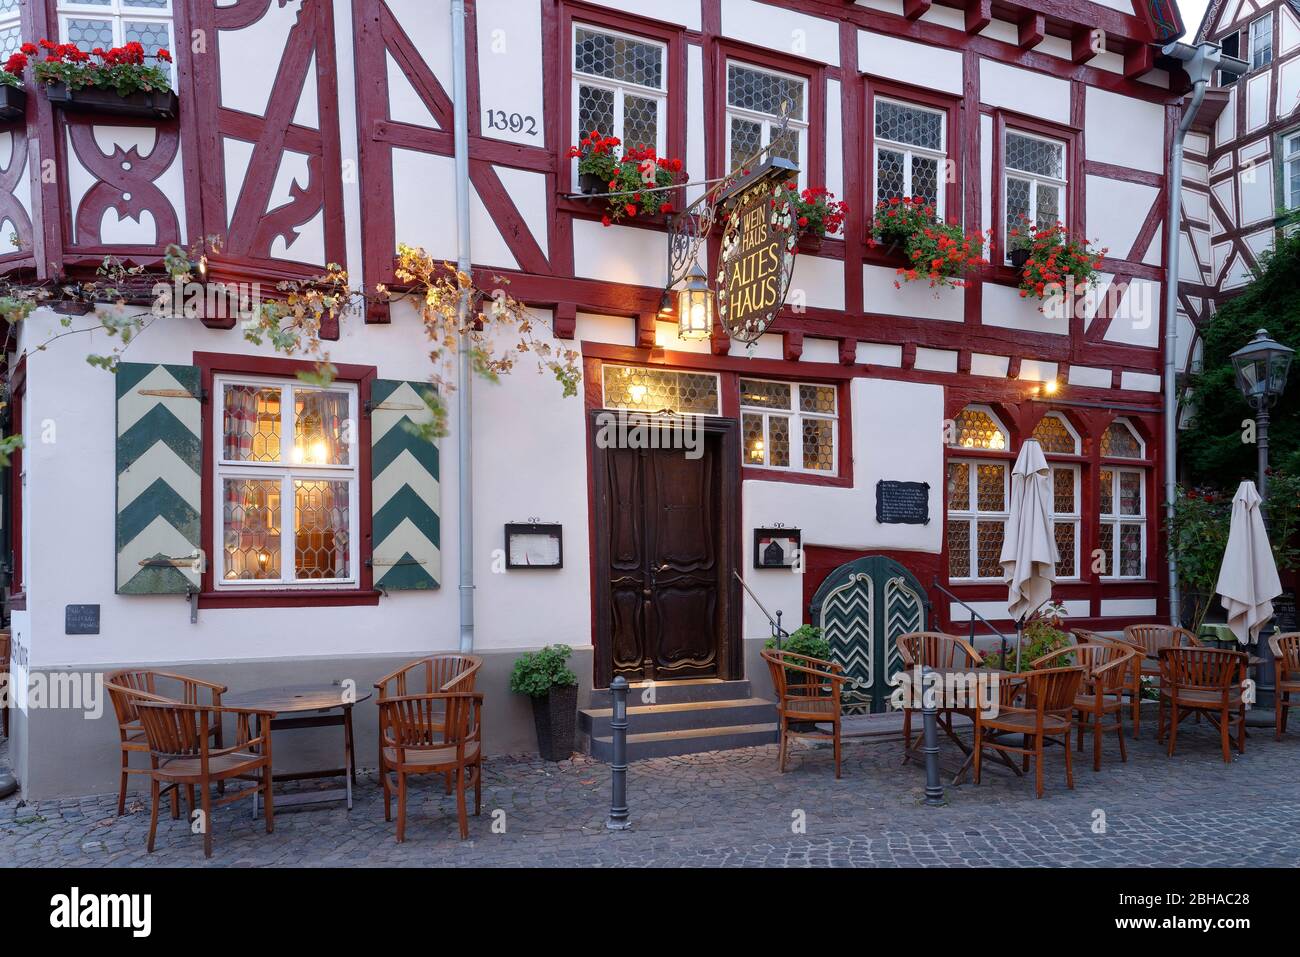 Wine house Old house at the old market square in the evening light in Bacharach am Rhein, Bacharach, Rhine Valley, UNESCO World Heritage Upper Middle Rhine Valley, Rhineland-Palatinate, Germany Stock Photo